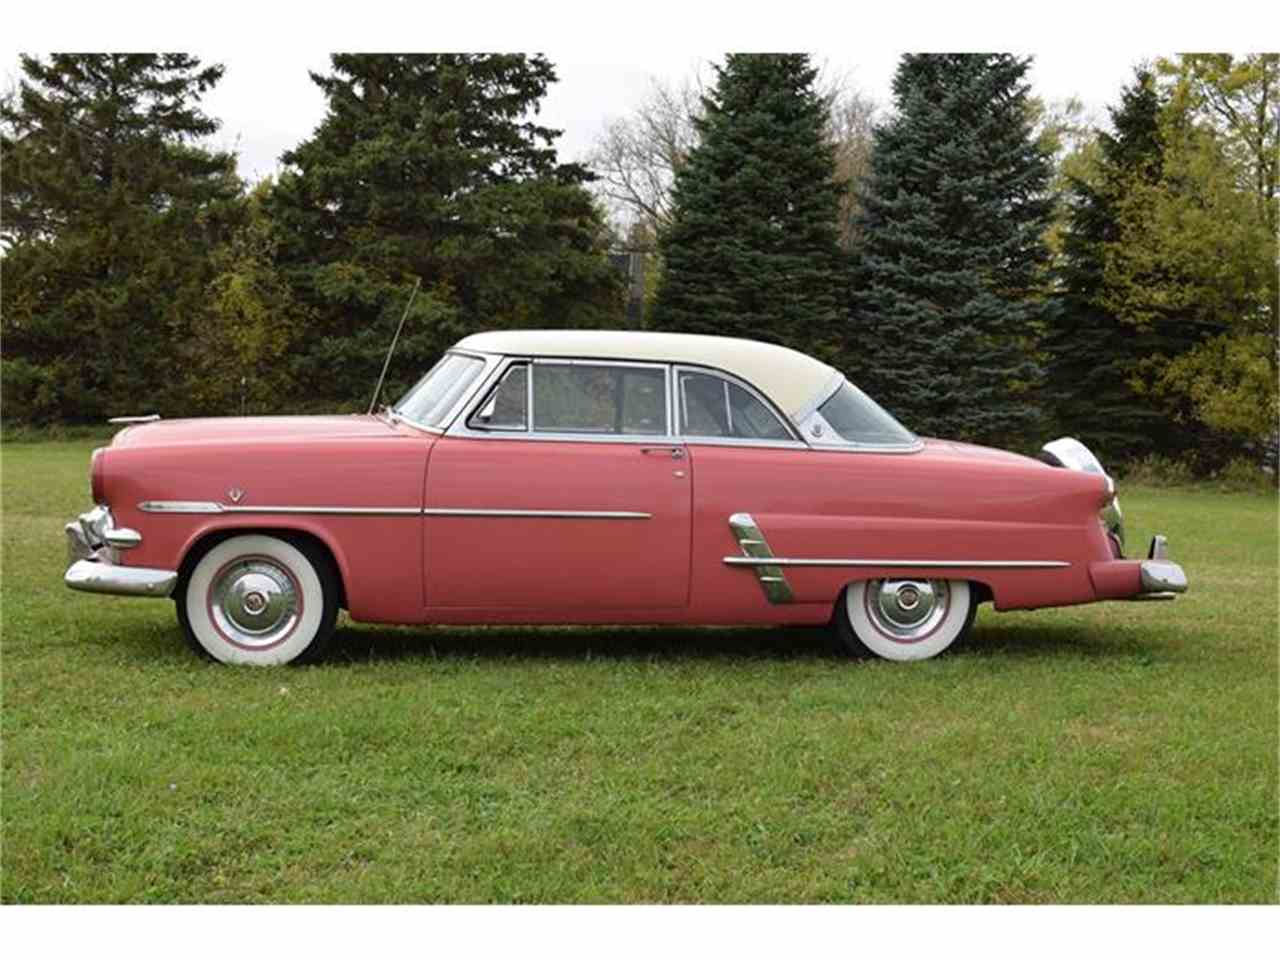 1953 Ford Victoria For Sale Classiccars Cc 731362 truly Classic Cars Watertown Mn